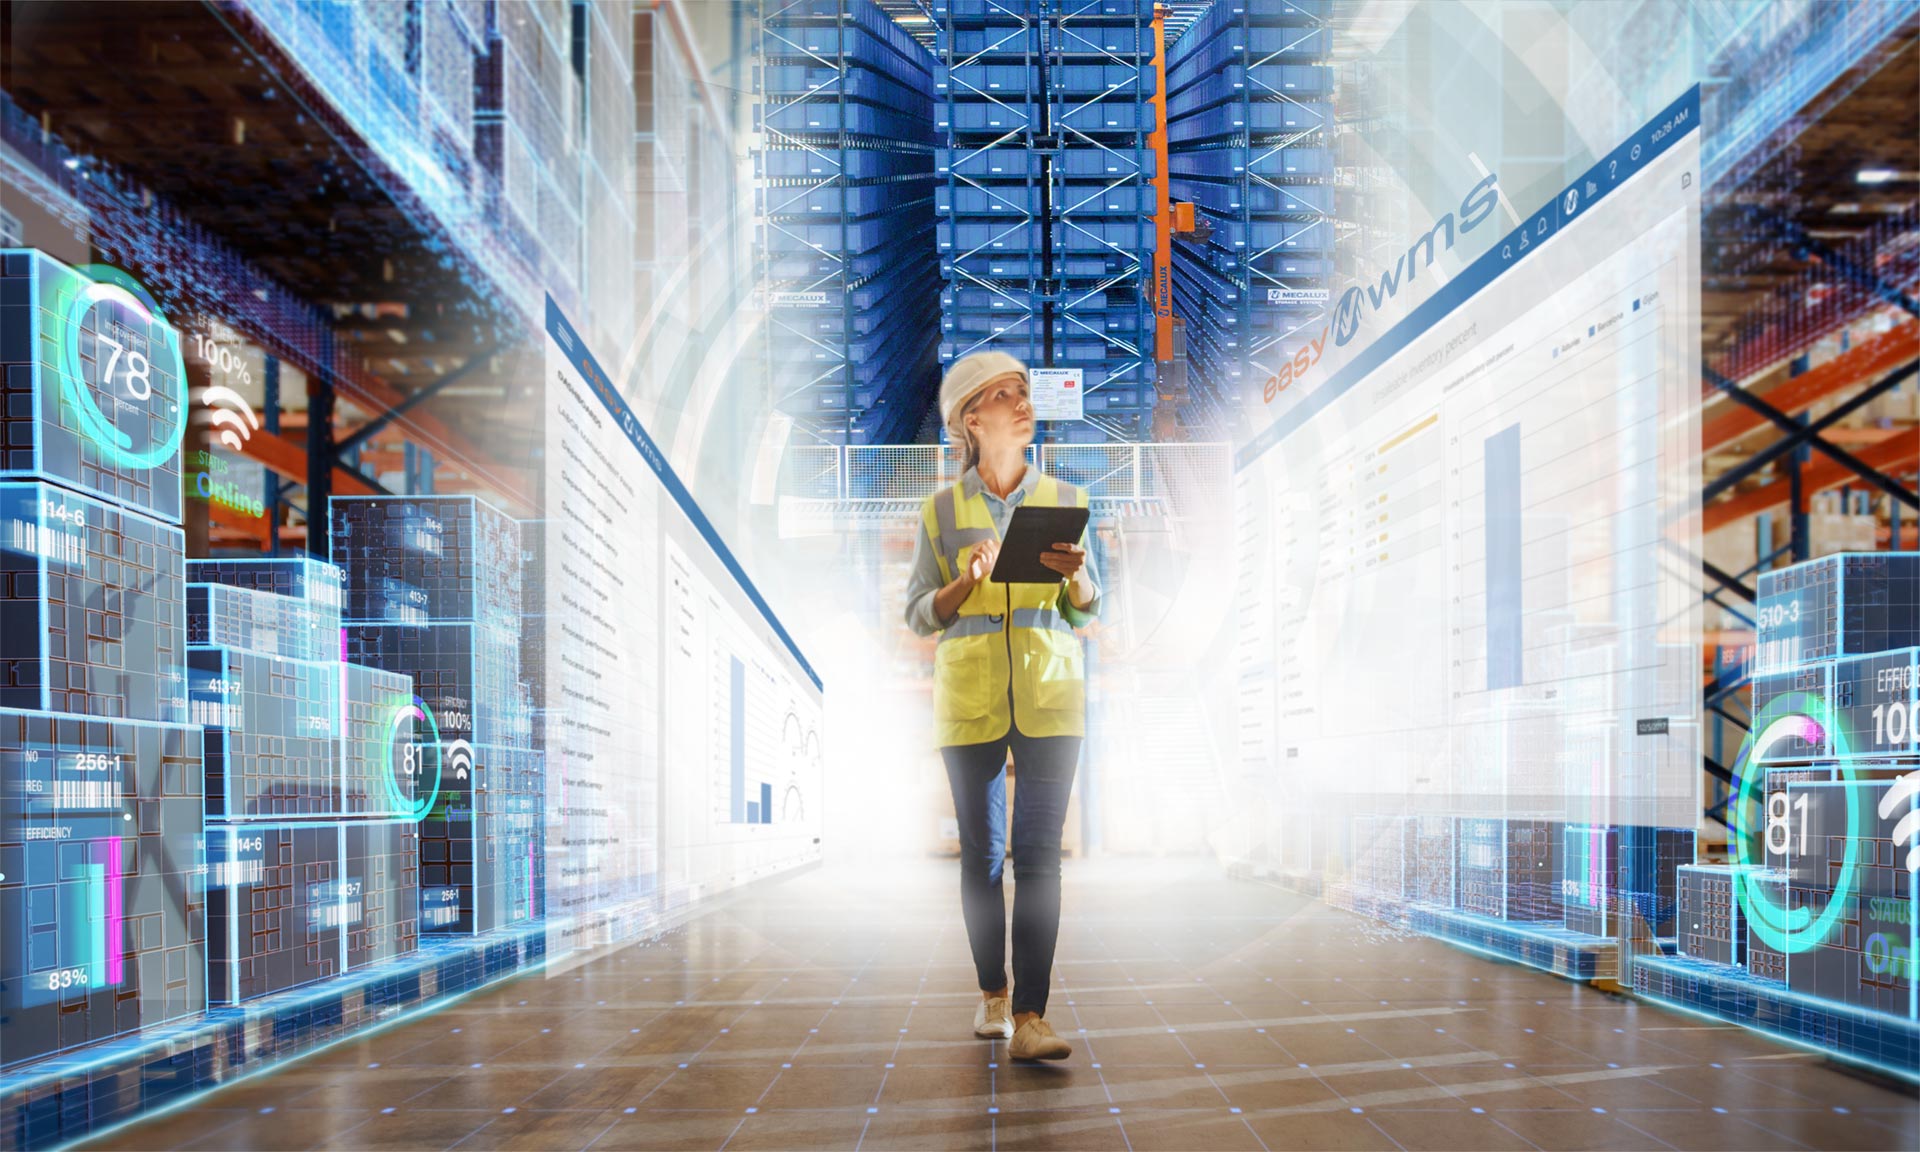 Digital warehousing makes use of technology and automation to optimize processes